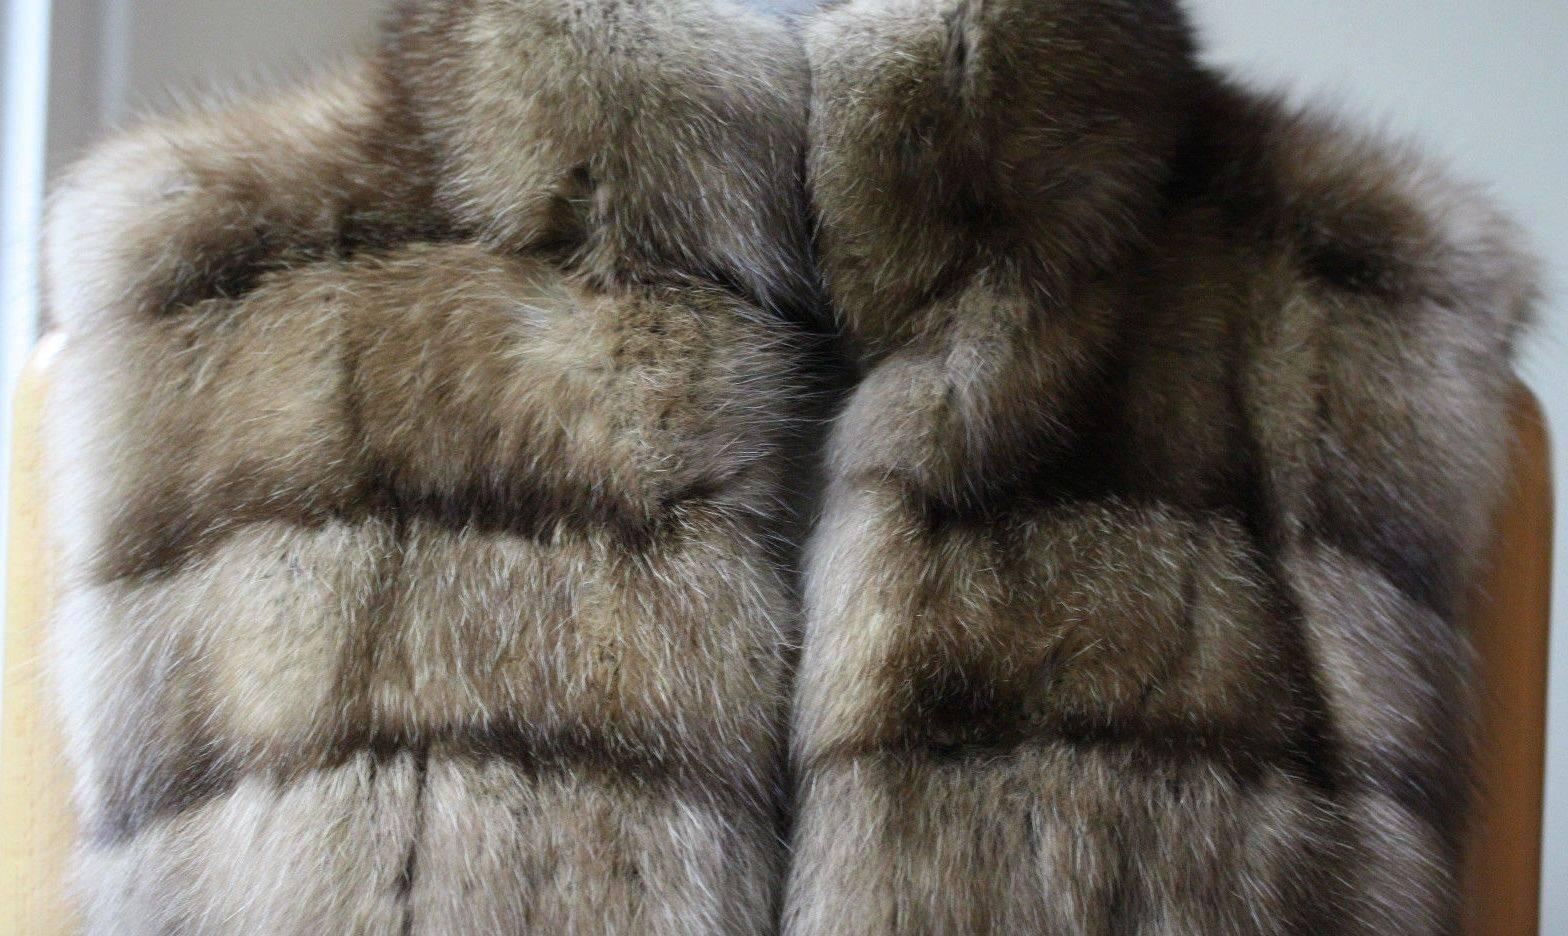 Stunning golden sable reversible fur jacket with crocodile detailing and delicate suede lining. Fur is beautifully soft. Featuring front clip fastening. Make an impact during après-ski.

Size: UK 8, US 4, IT 40, FR 36

Condition: Size label has been